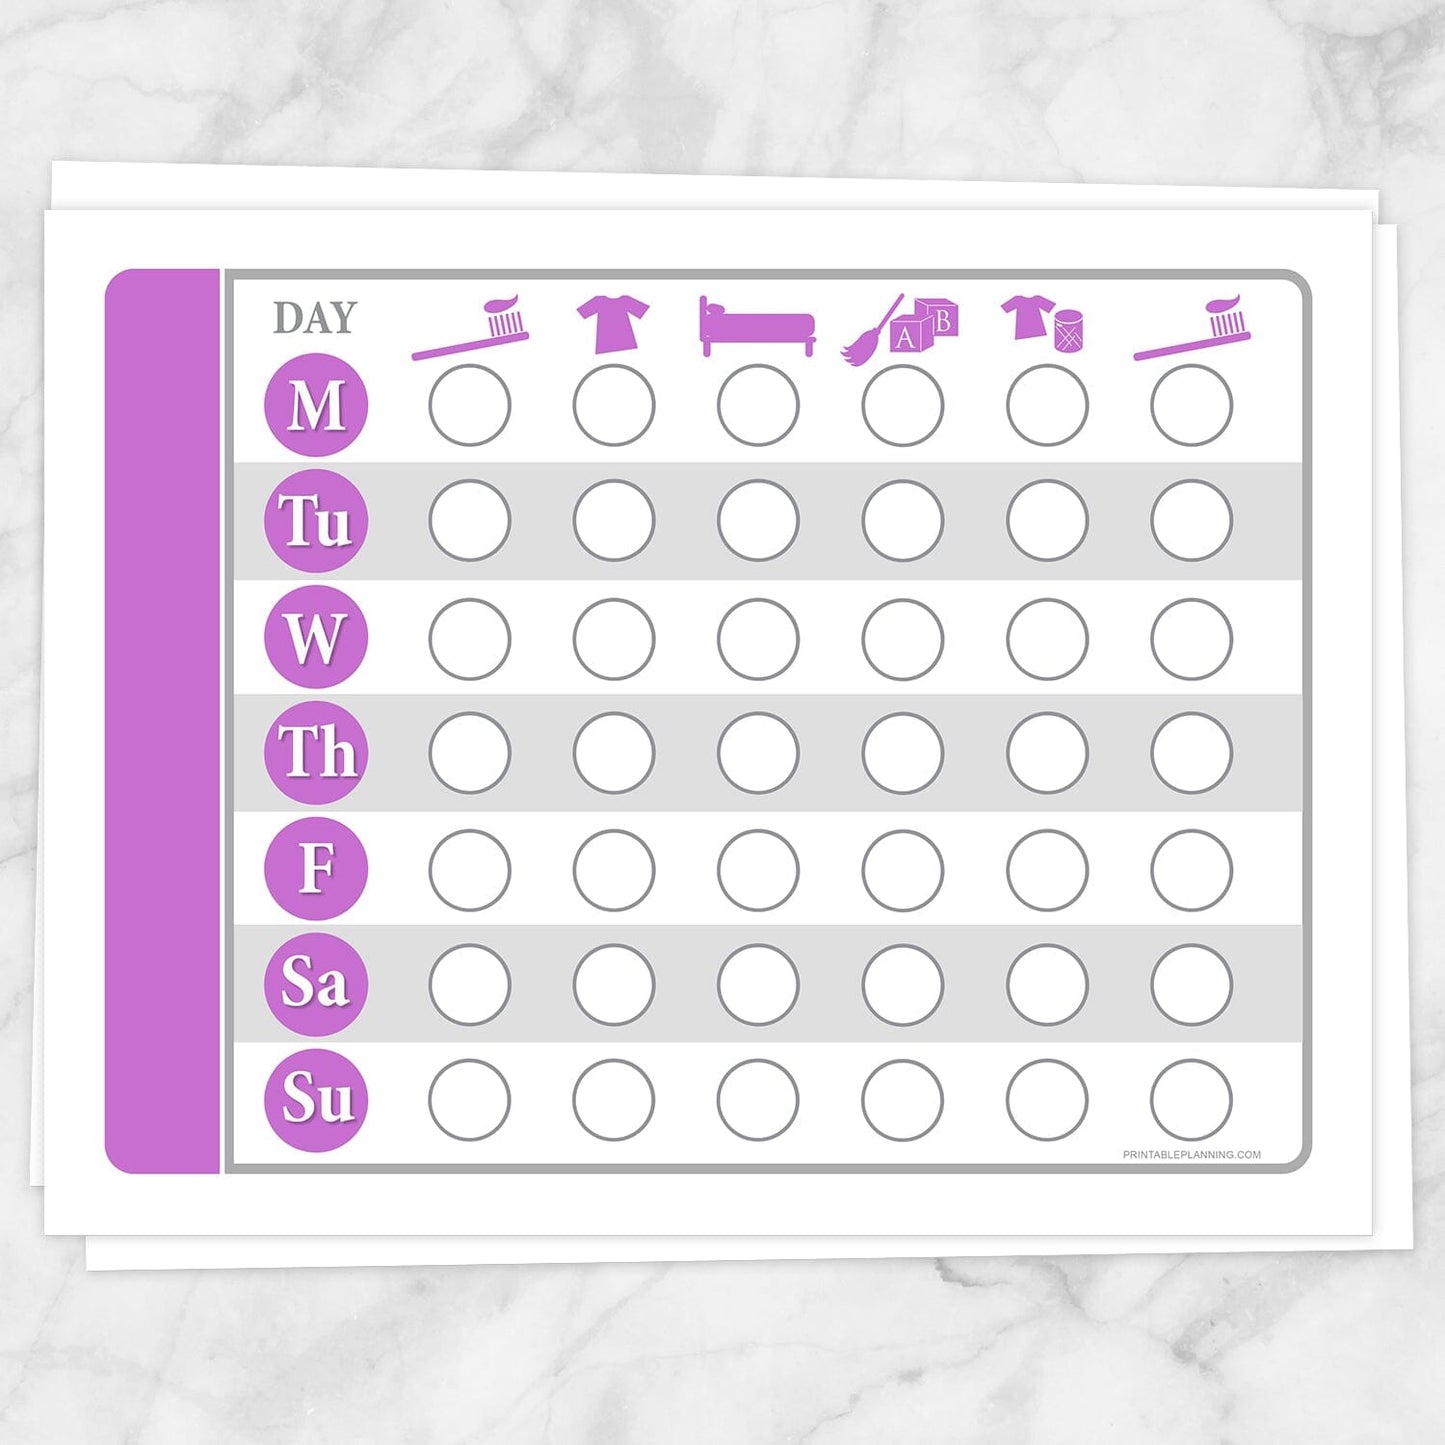 Printable Toddler Chore Chart - Purple Daily Routine Weekly Pages at Printable Planning.